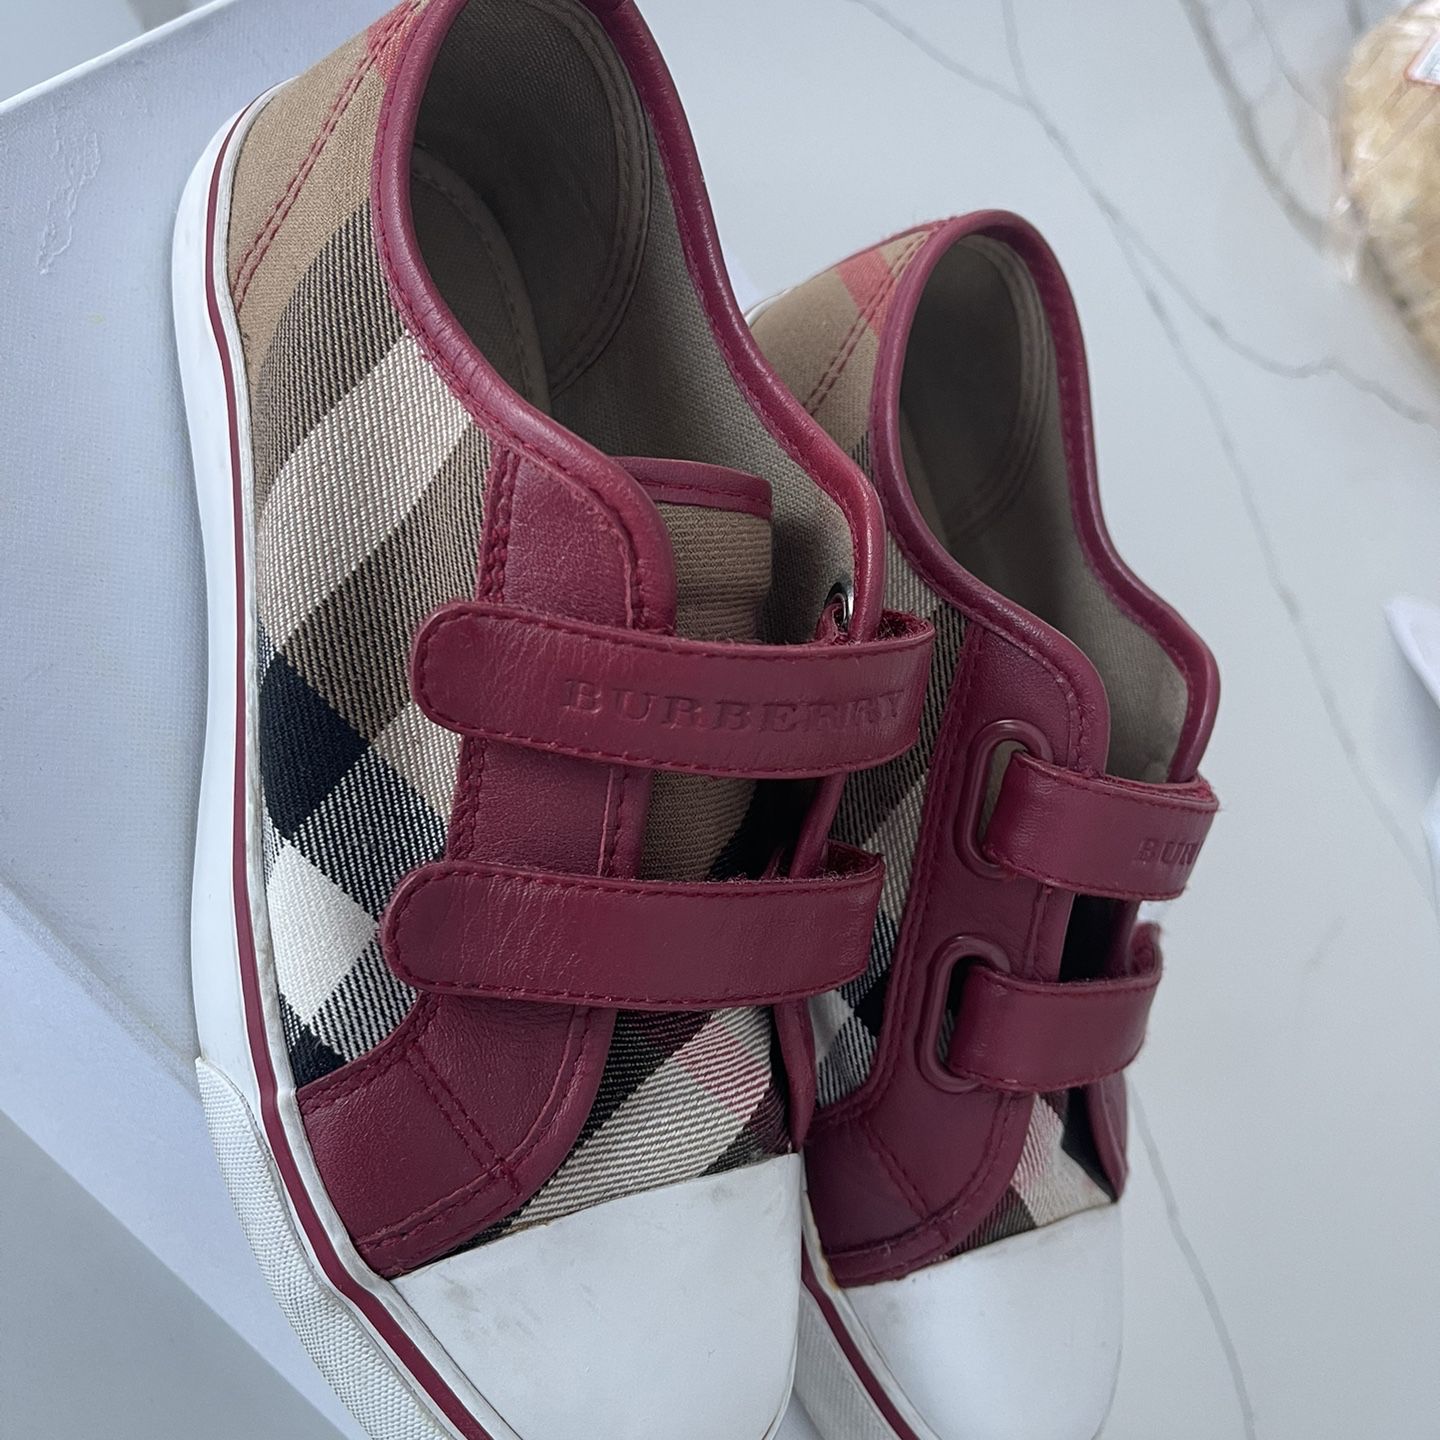 Burberry Shoes